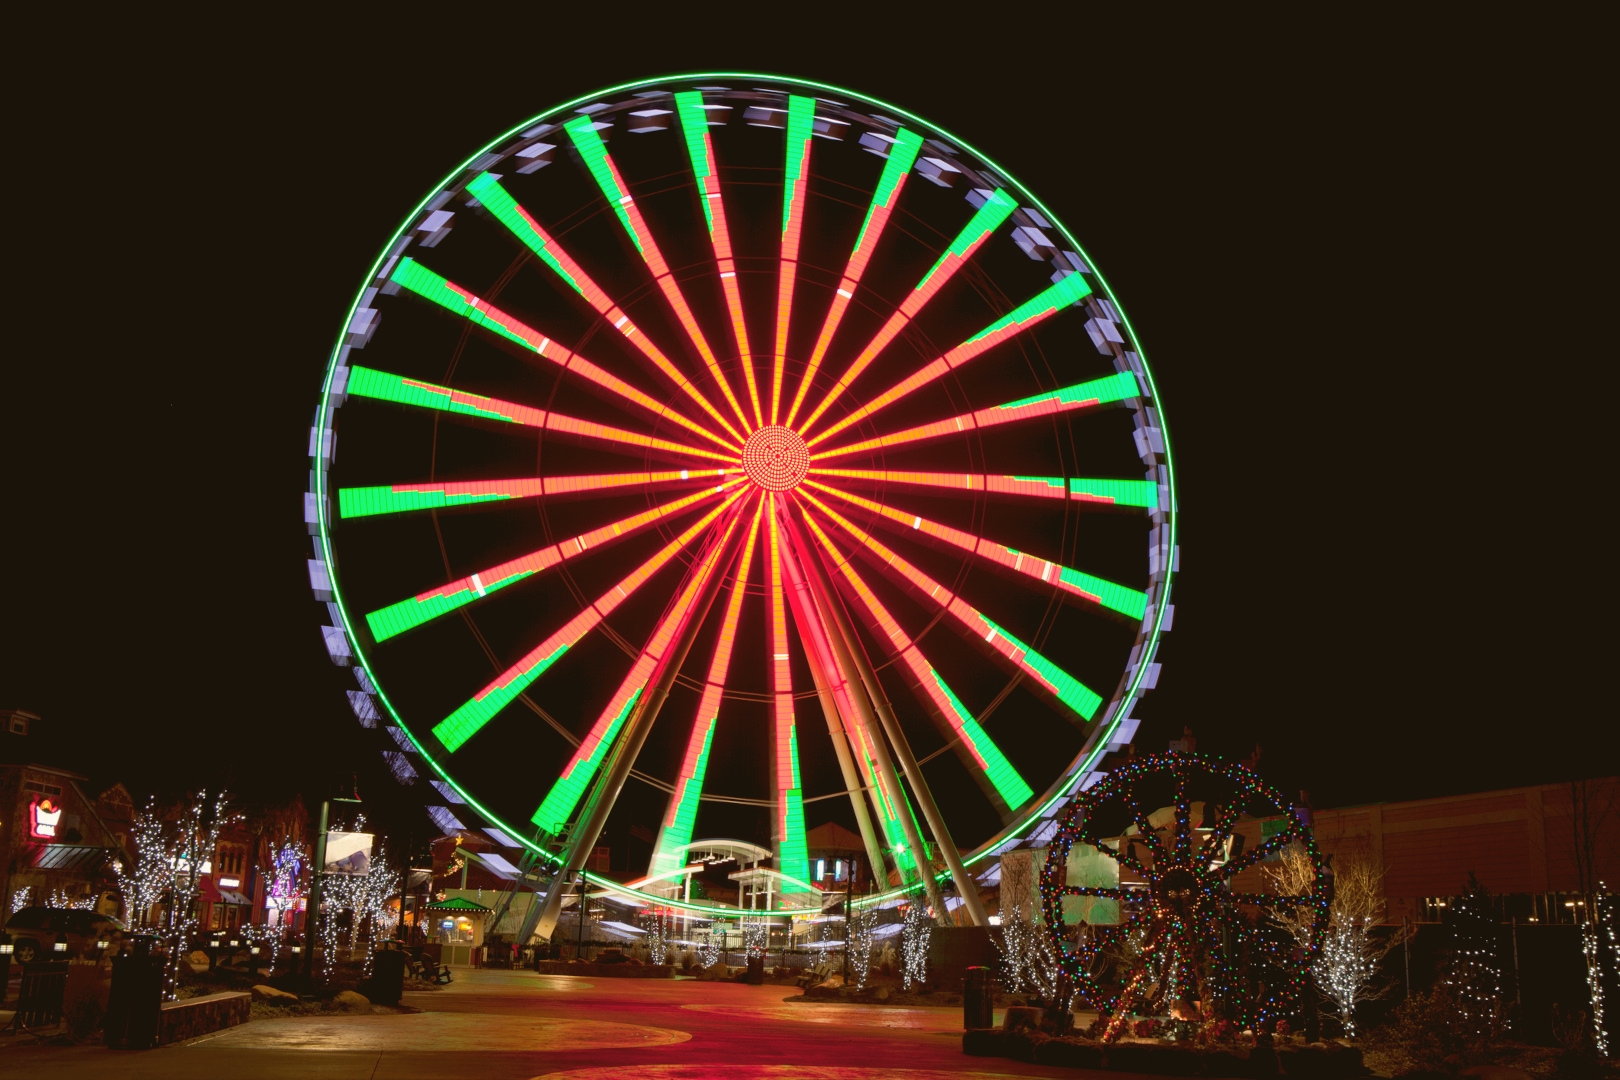 The Great Smoky Mountain Wheel, a ferris wheel in Pigeon Forge, TN, lit up at night for Christmas